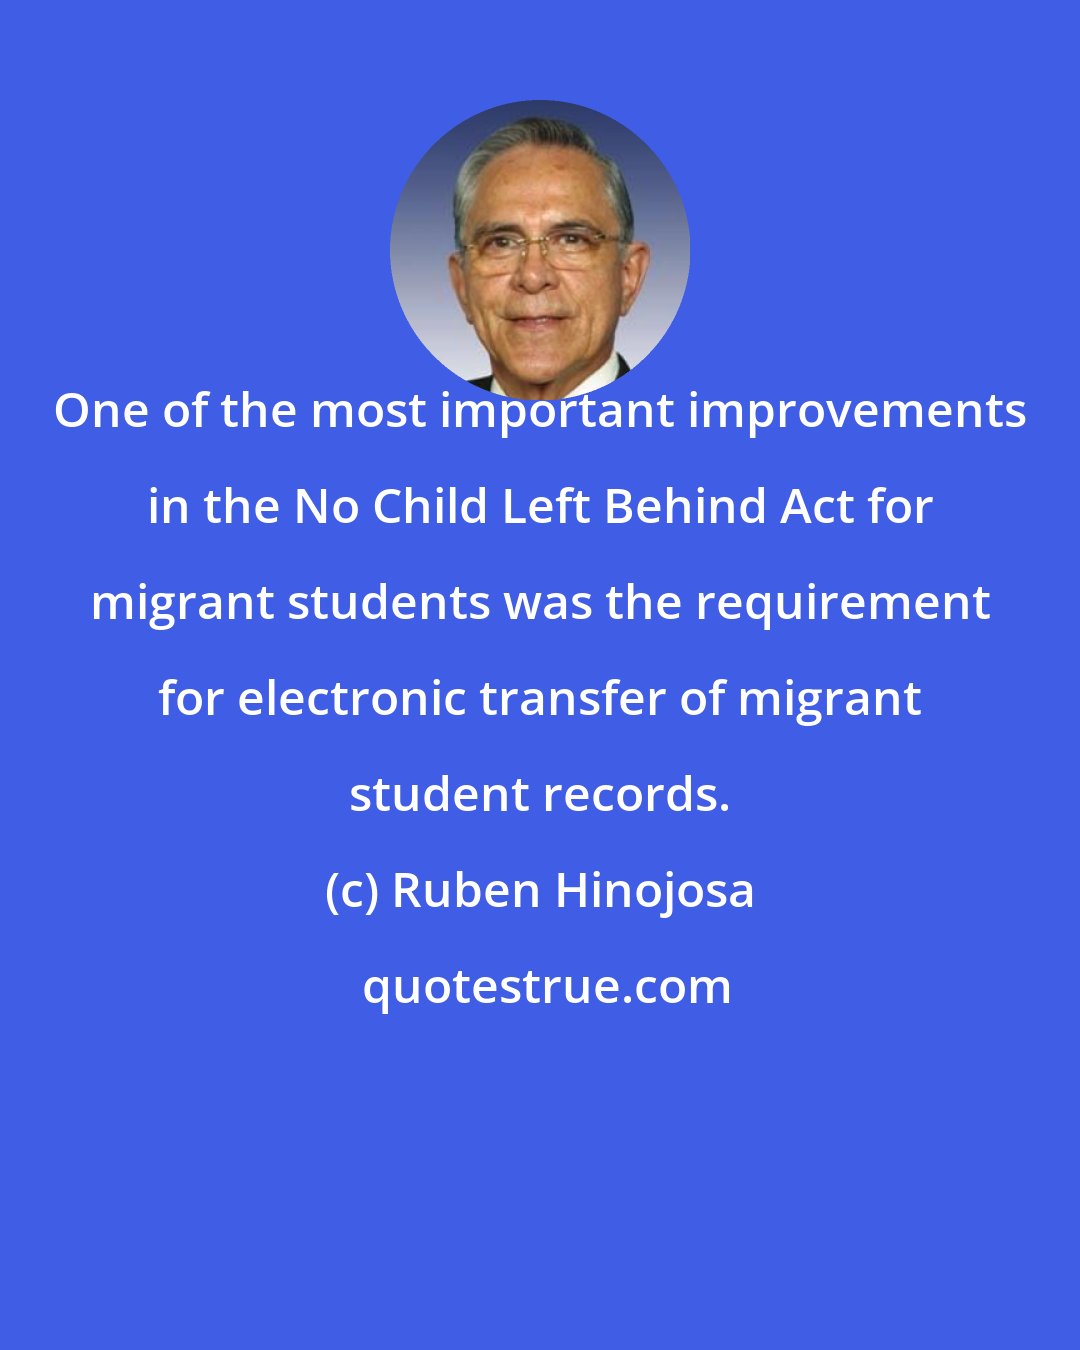 Ruben Hinojosa: One of the most important improvements in the No Child Left Behind Act for migrant students was the requirement for electronic transfer of migrant student records.